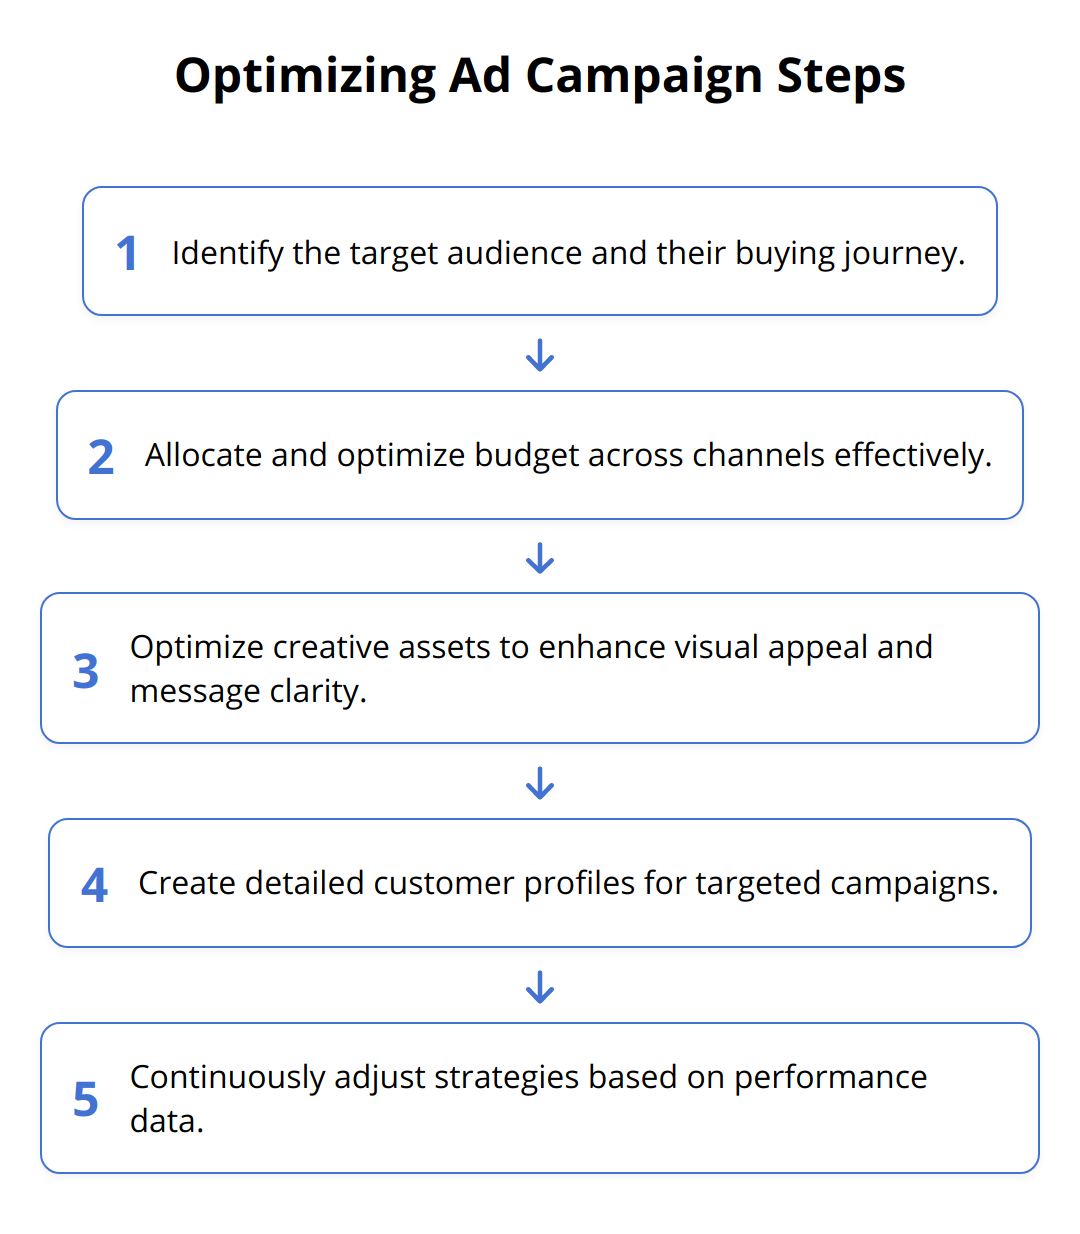 Flow Chart - Optimizing Ad Campaign Steps